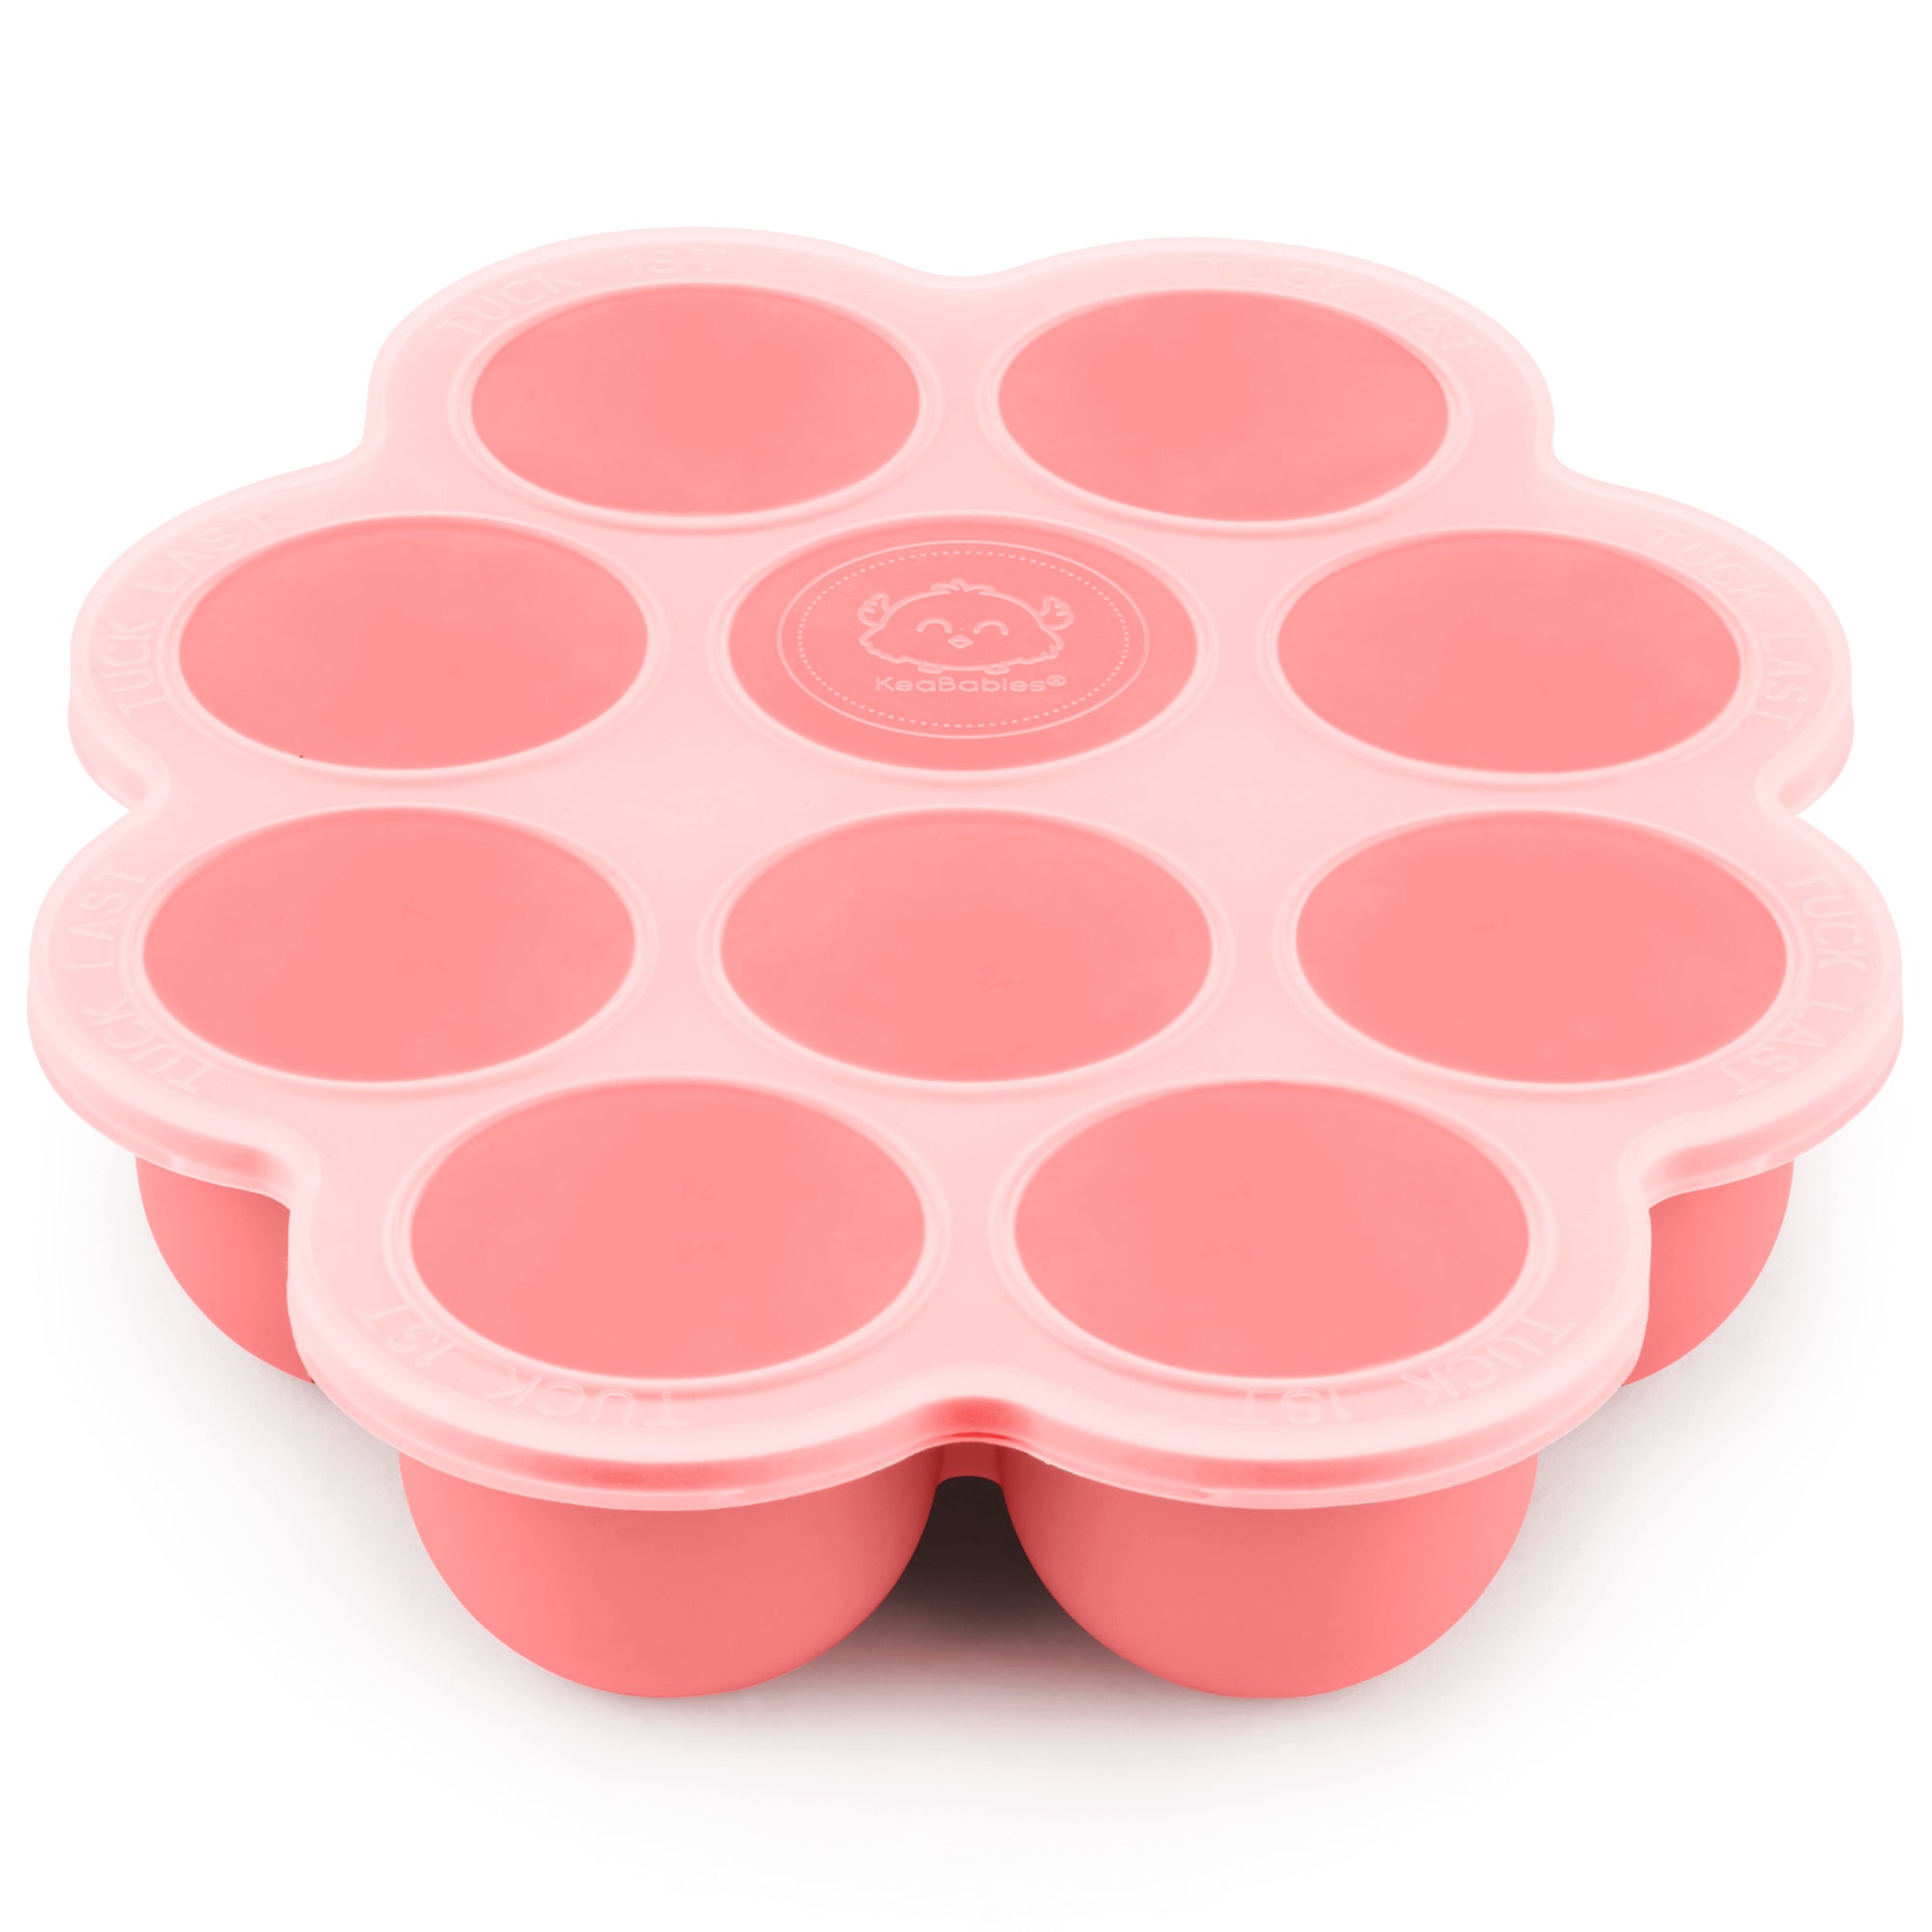 Silicone Baby Food Freezer Tray with Clip-On Lid by WeeSprout - Perfect